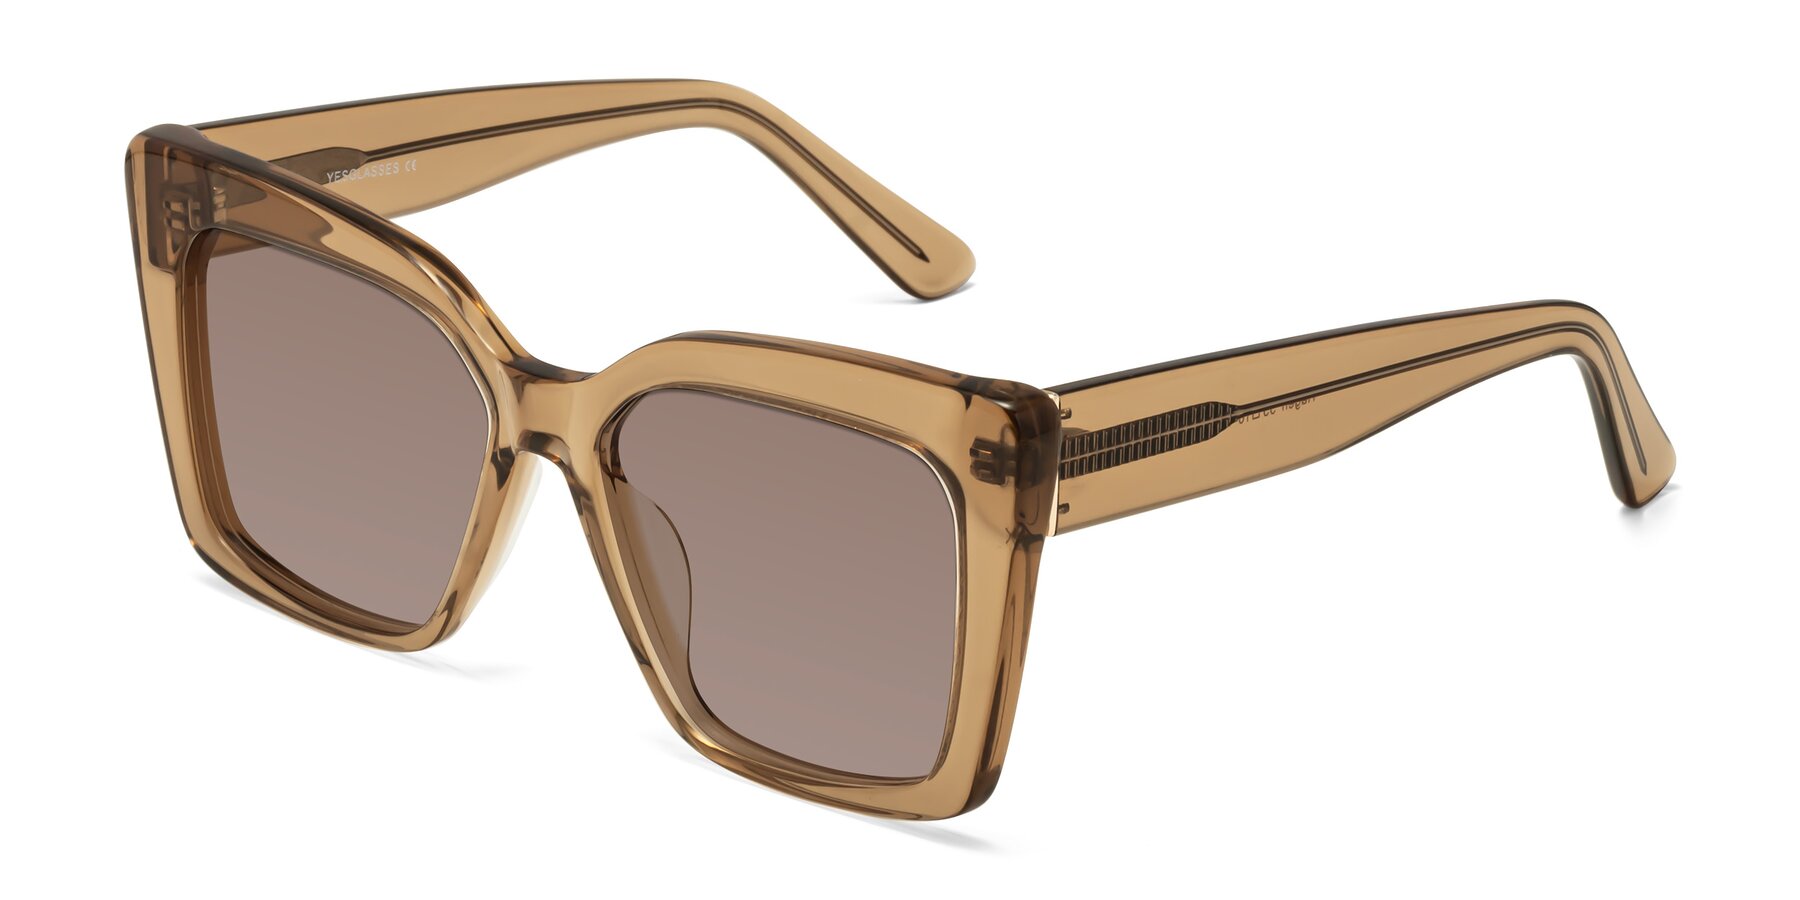 Angle of Hagen in Translucent Brown with Medium Brown Tinted Lenses